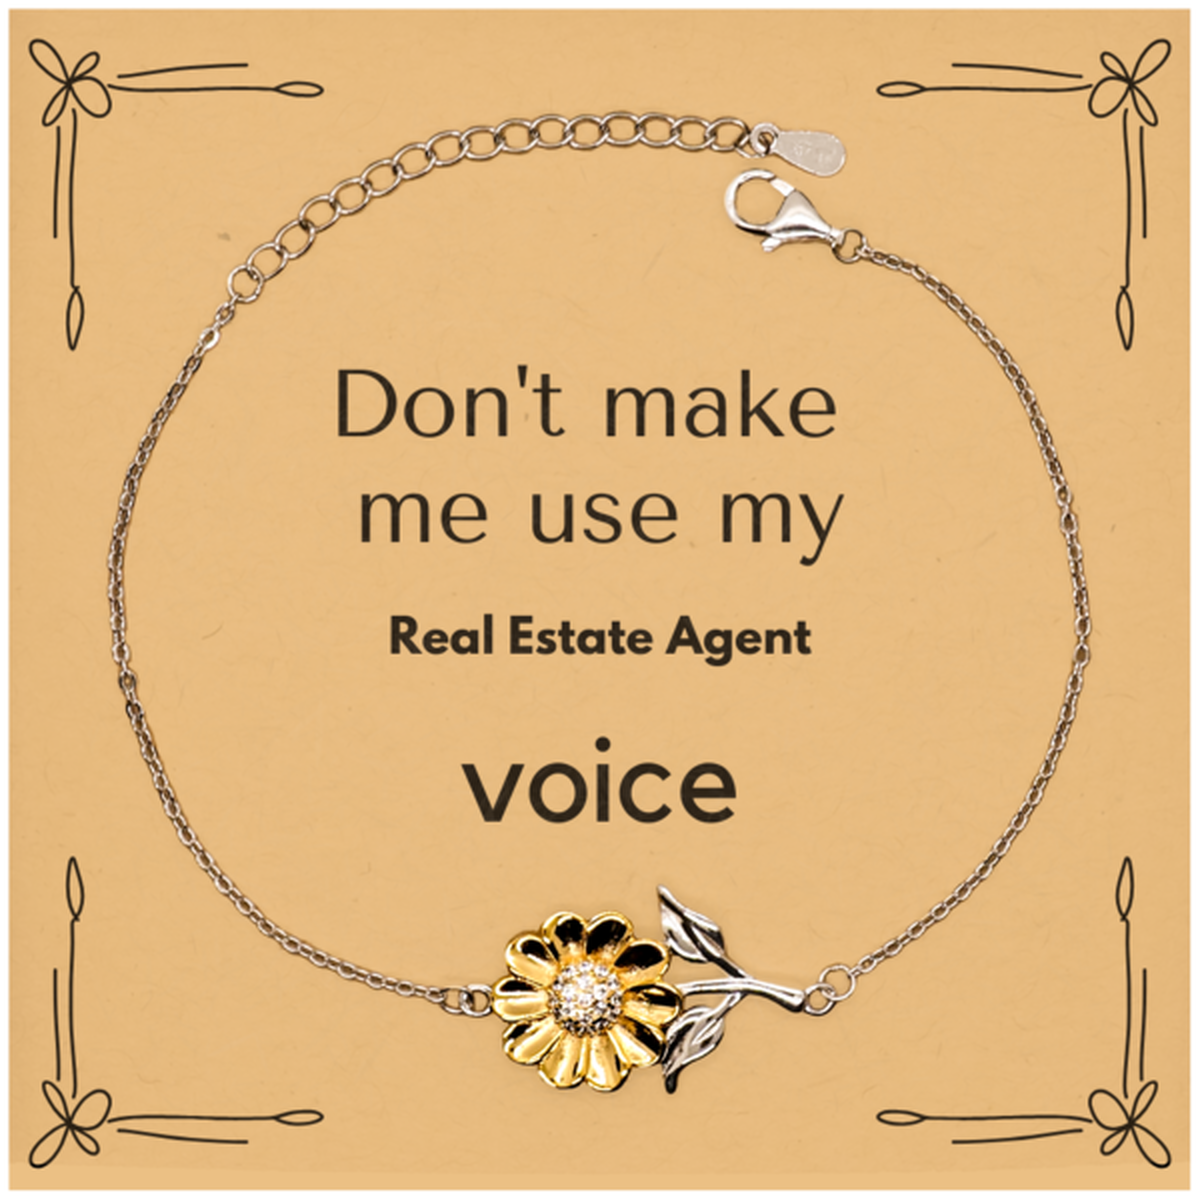 Don't make me use my Real Estate Agent voice, Sarcasm Real Estate Agent Card Gifts, Christmas Real Estate Agent Sunflower Bracelet Birthday Unique Gifts For Real Estate Agent Coworkers, Men, Women, Colleague, Friends